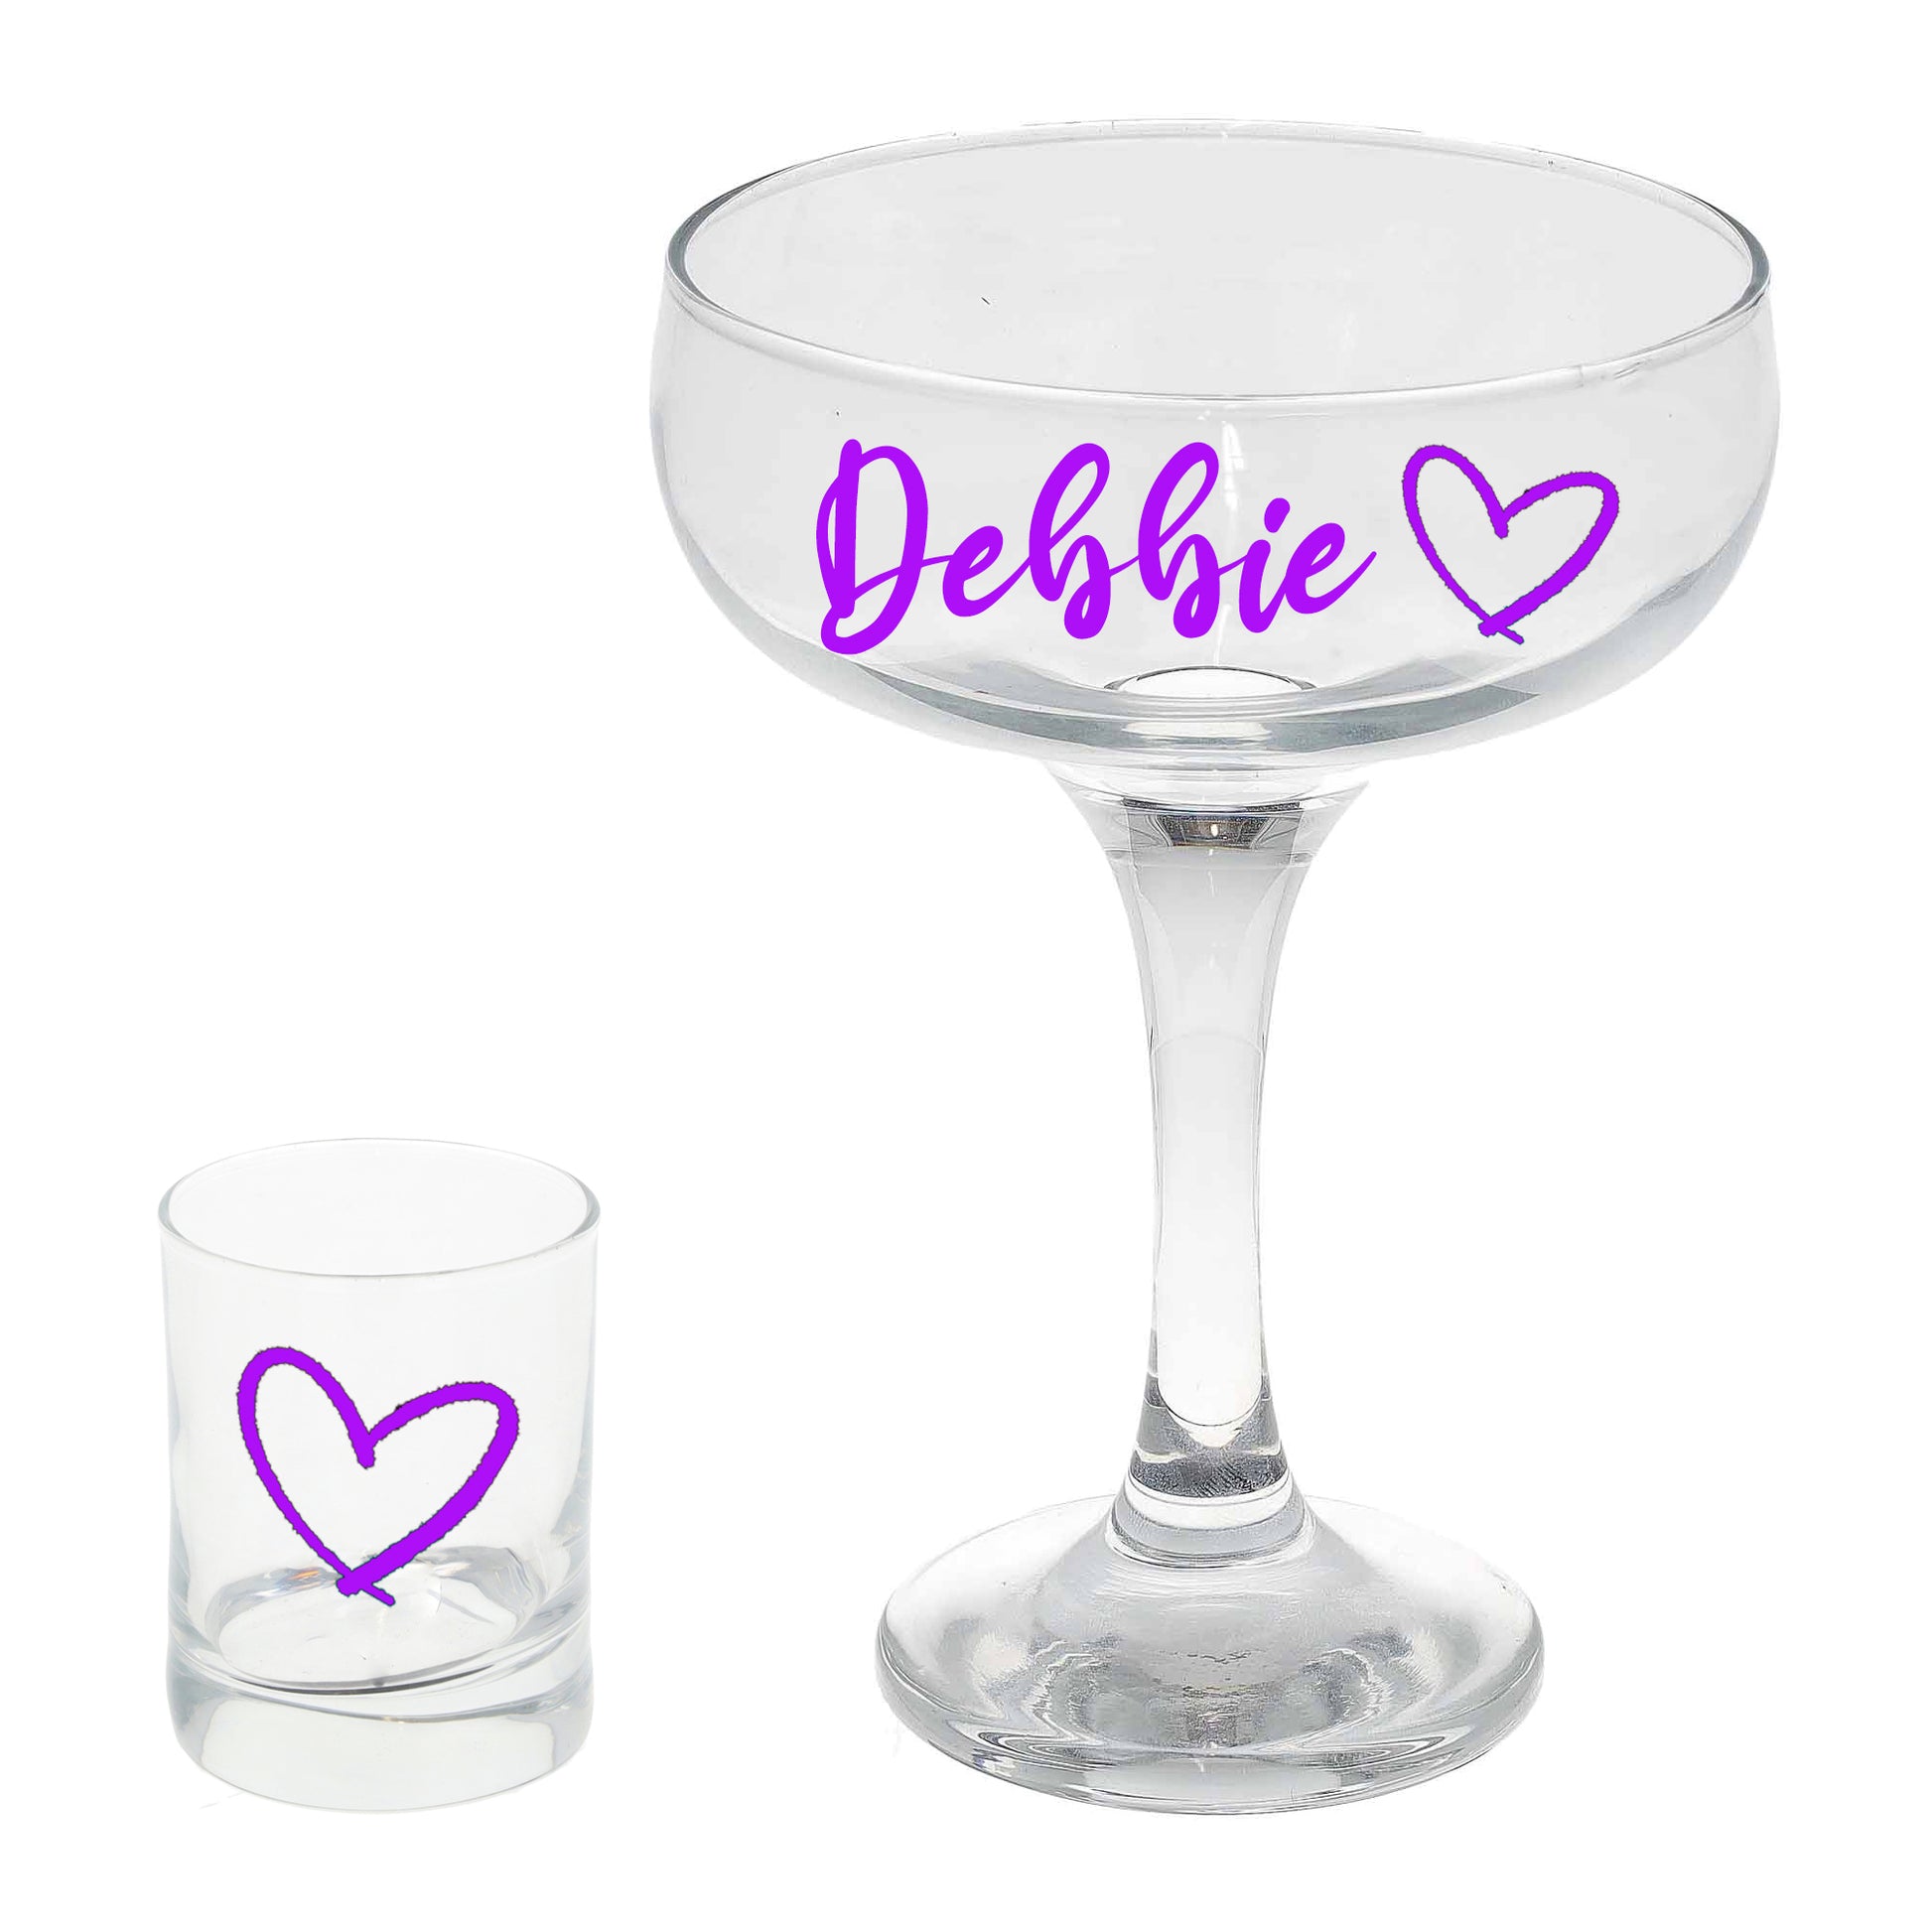 Personalised Pornstar Martini Cocktail Shaker Set With Glass & Shot Glass Gift Set  - Always Looking Good - Glasses Only  